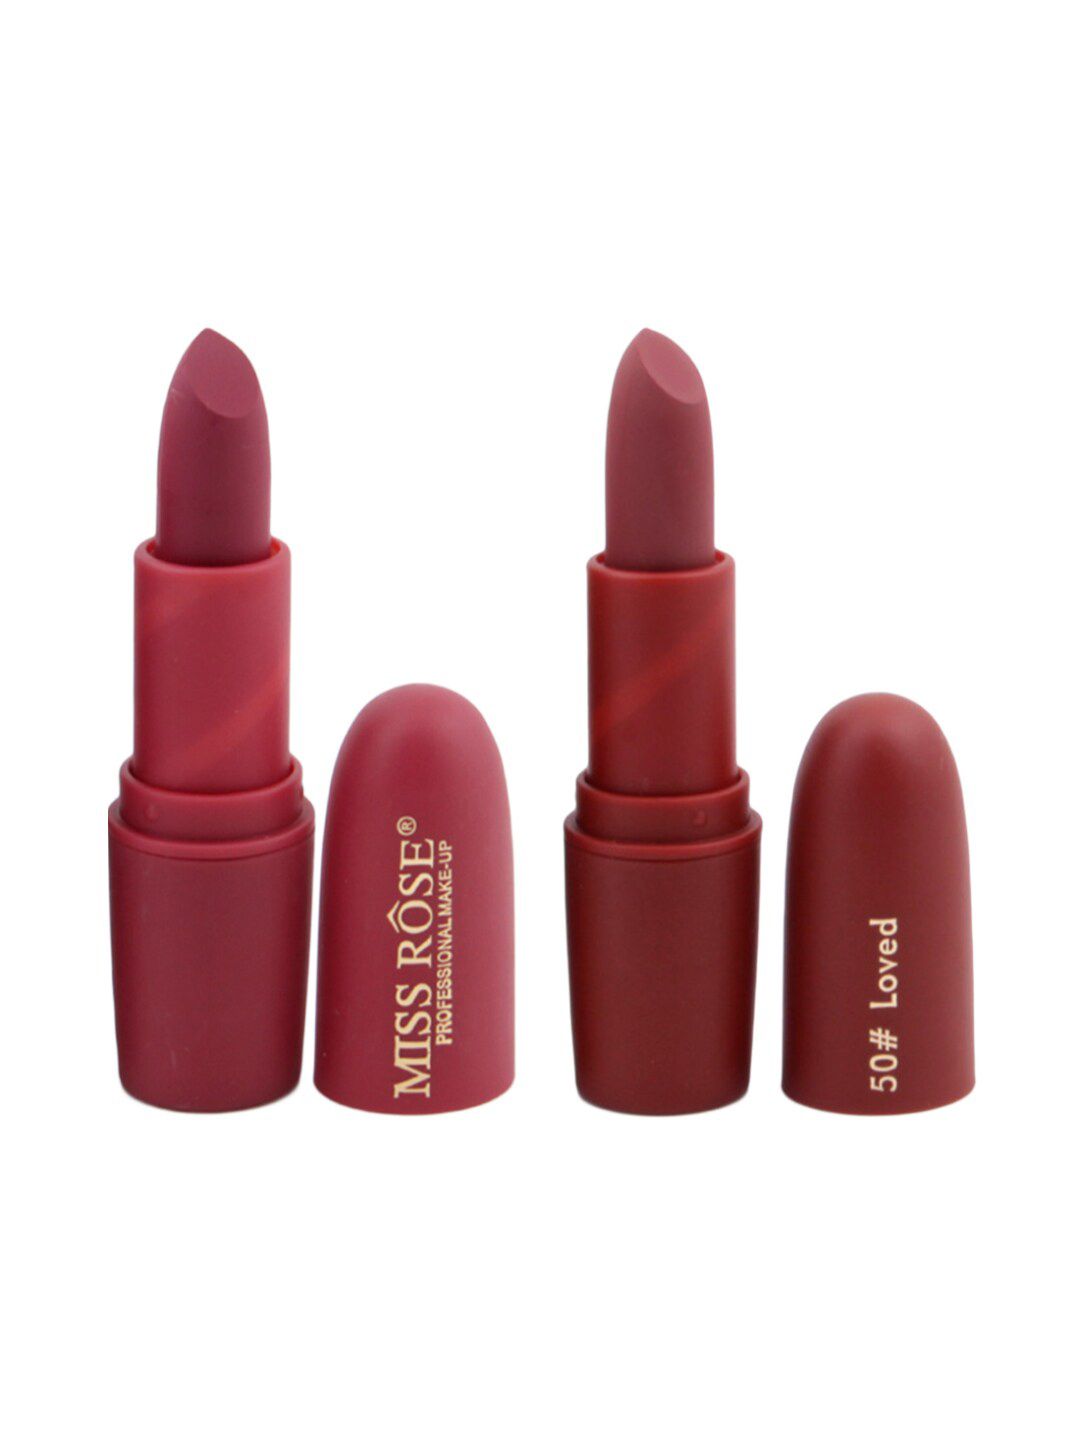 MISS ROSE Set of 2 Matte Creamy Lipsticks - Chii 49 & Loved 50 Price in India